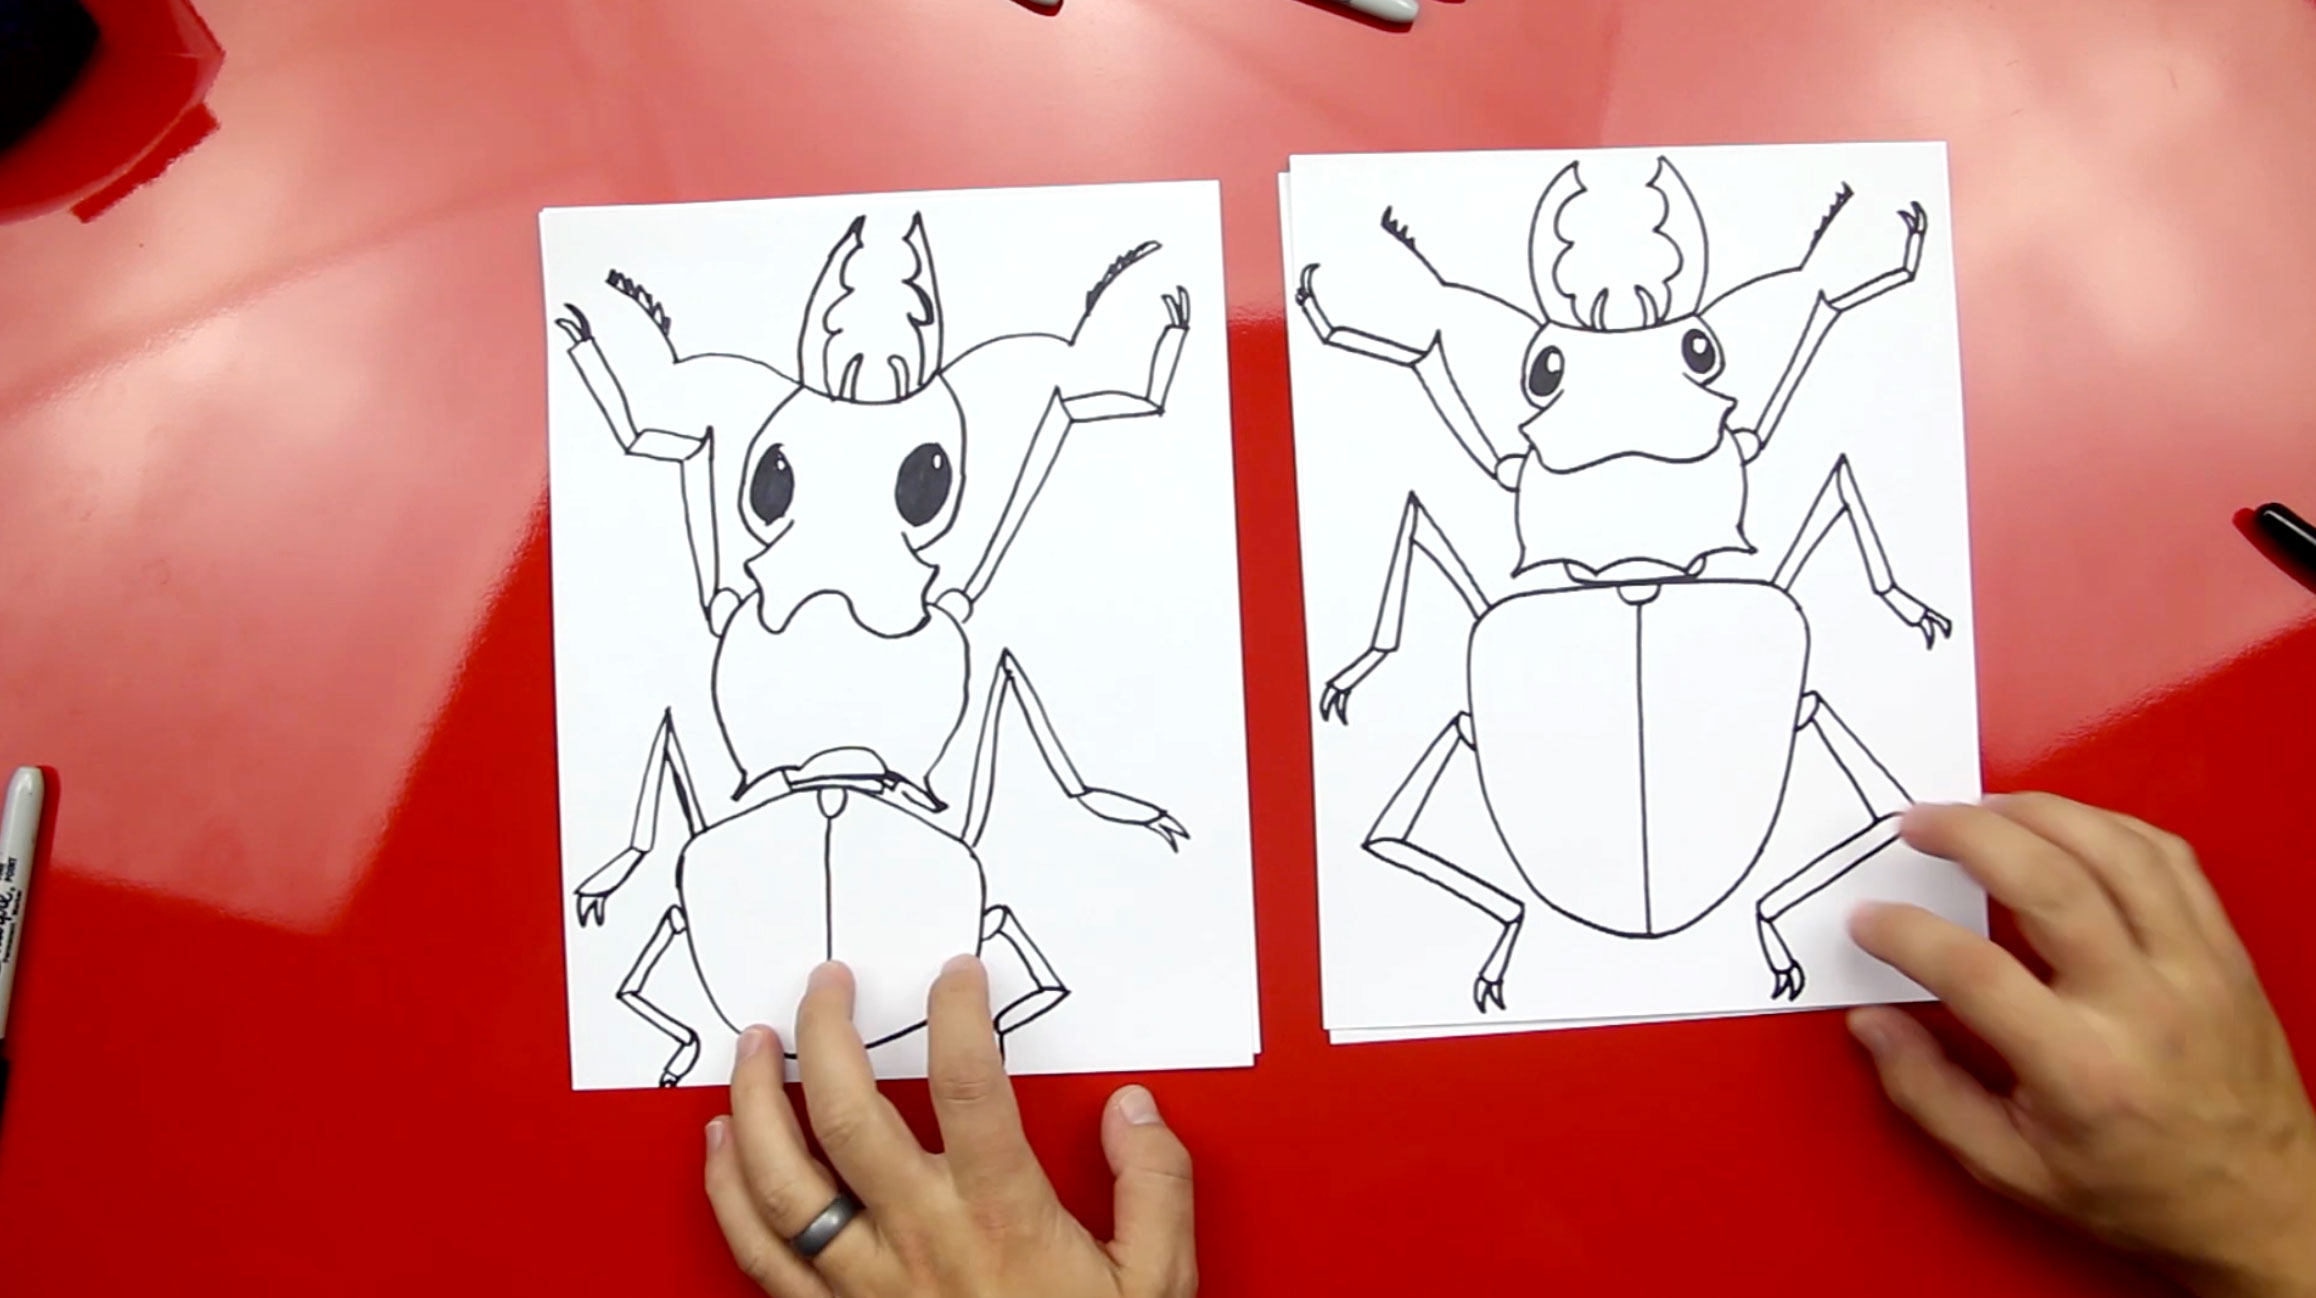 How To Draw A Daddy Long Legs - Art For Kids Hub 